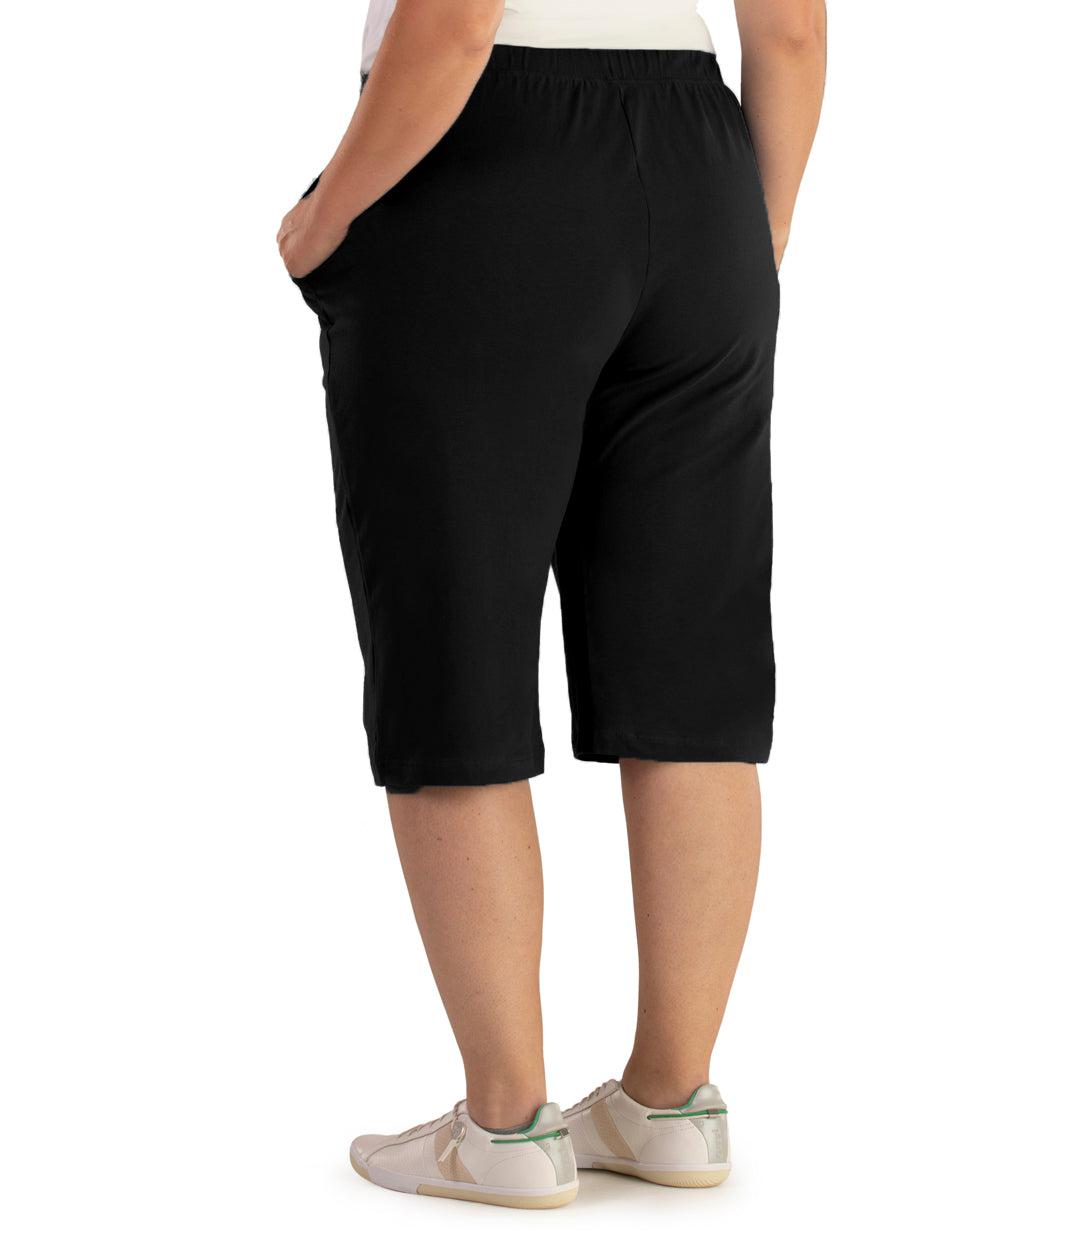 Bottom half of plus sized woman, back view, wearing JunoActive Stretch Naturals Bermuda Shorts in color black. Bottom hem is at the knee.